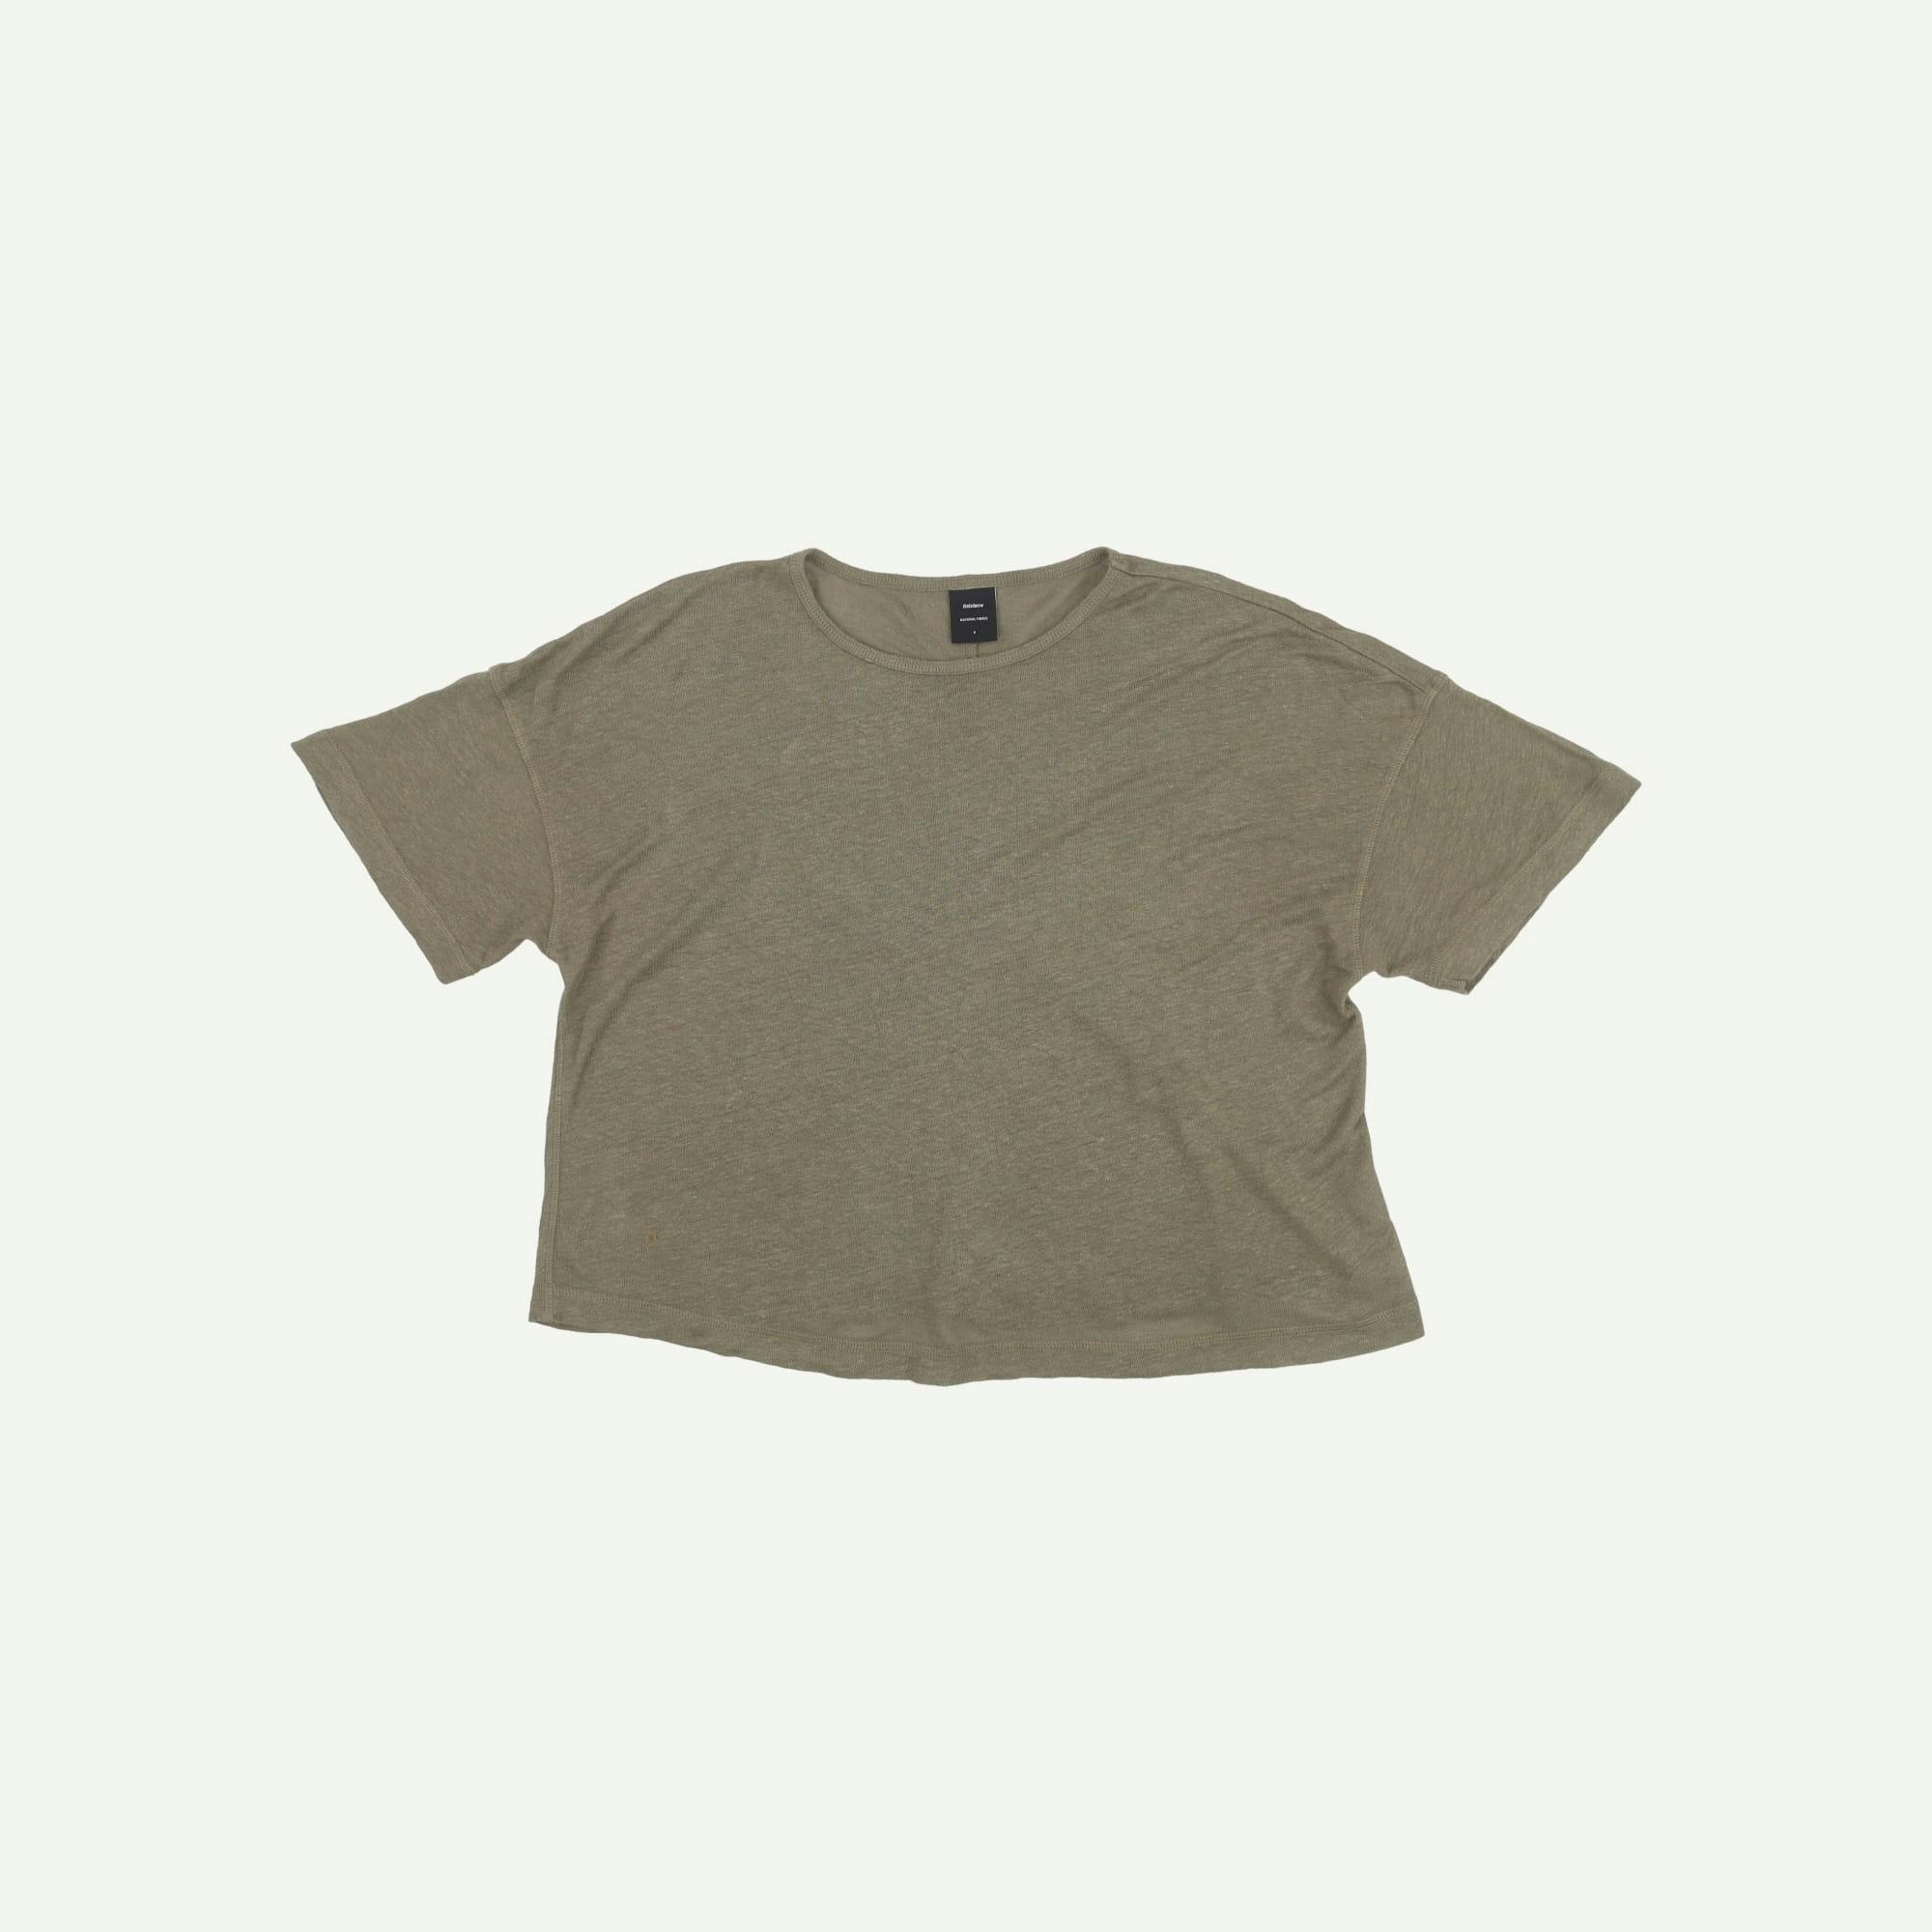 Finisterre Repaired Green T-shirt